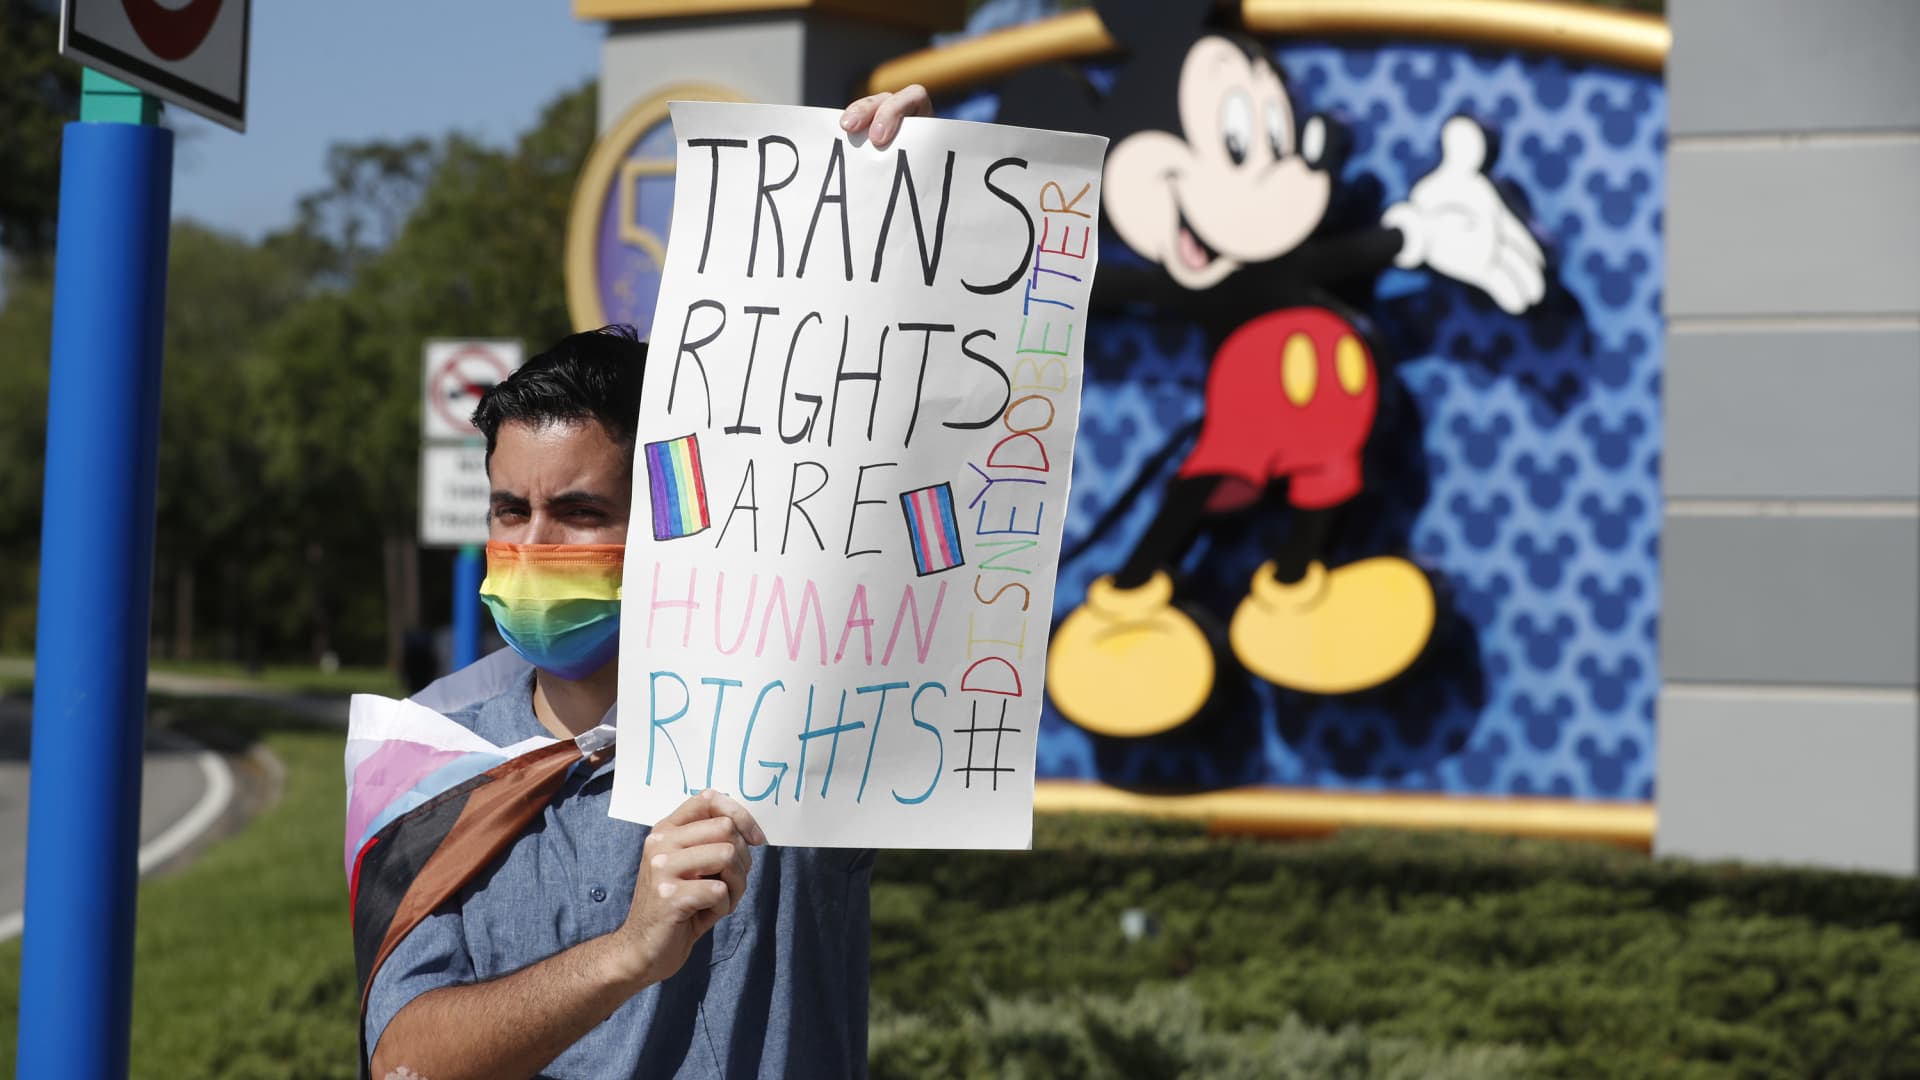 Disney networks among outlets that will air PSA featuring trans teen